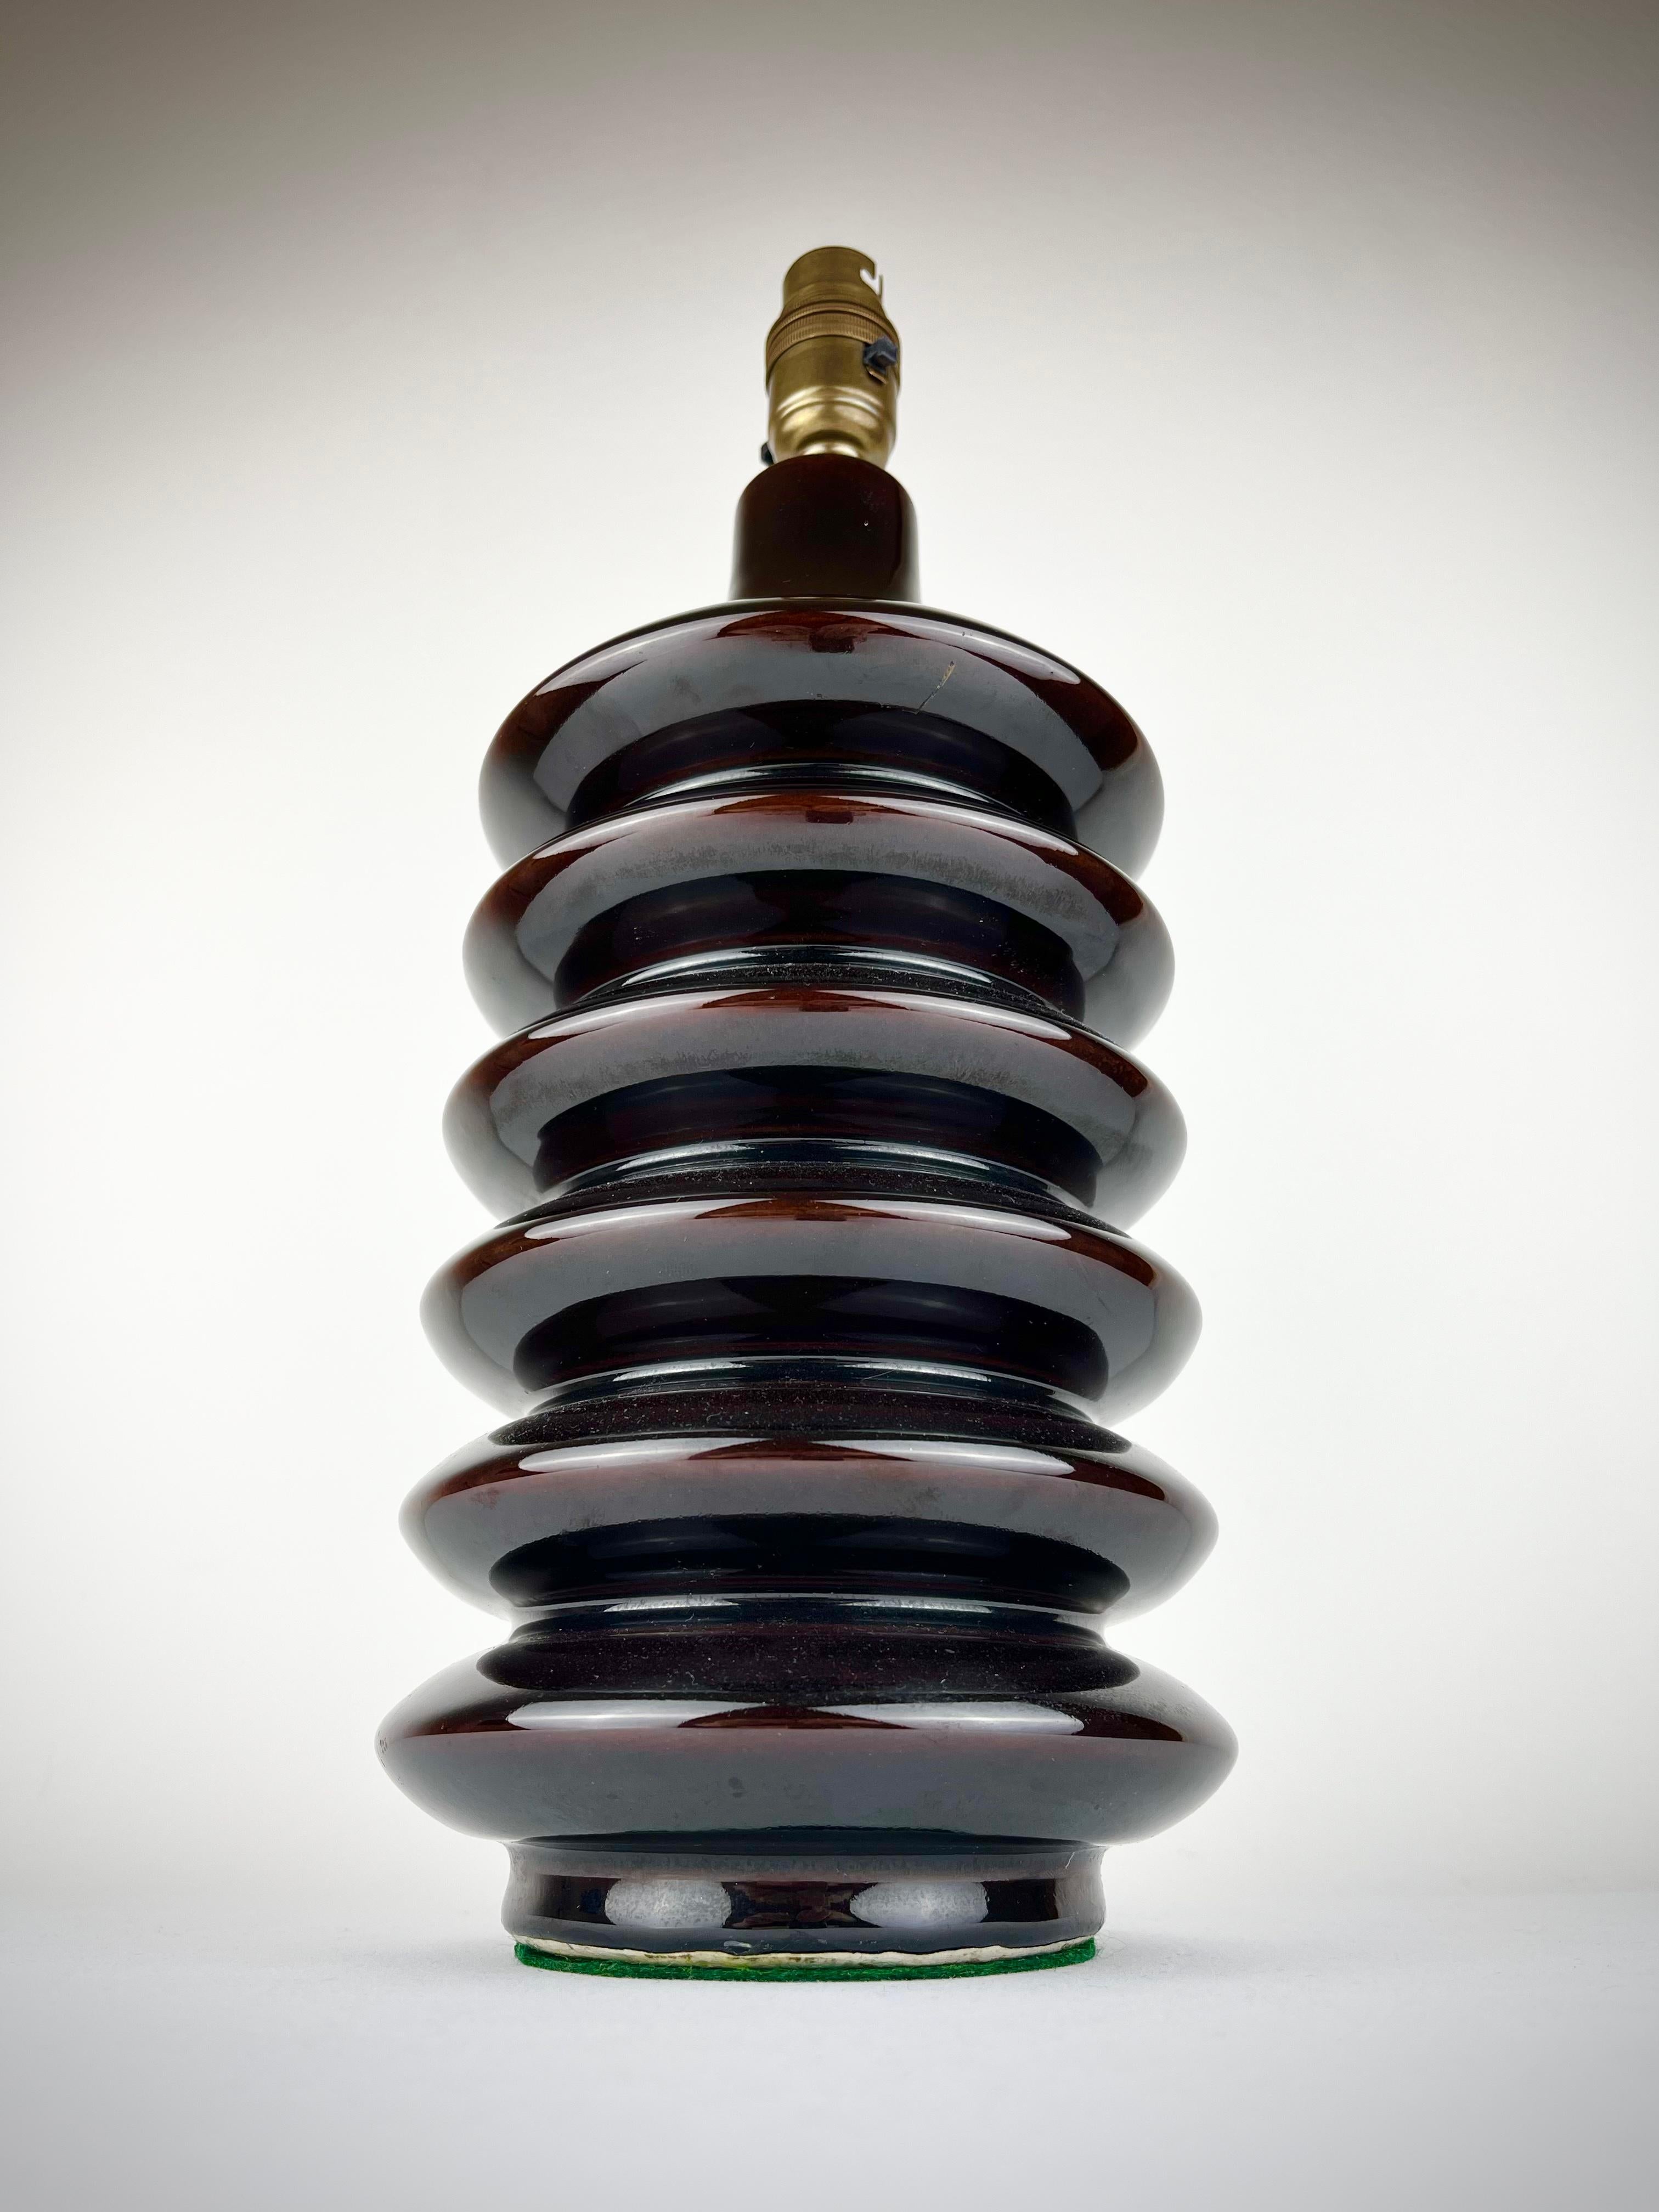 A beautiful mid century ceramic lamp base with a distinctive, sculptural form. Excellent condition.
Dark chocolate in colour, it has been rewired with a vintage style braided cable, recently PAT tested, and is ready to be paired with a shade of your